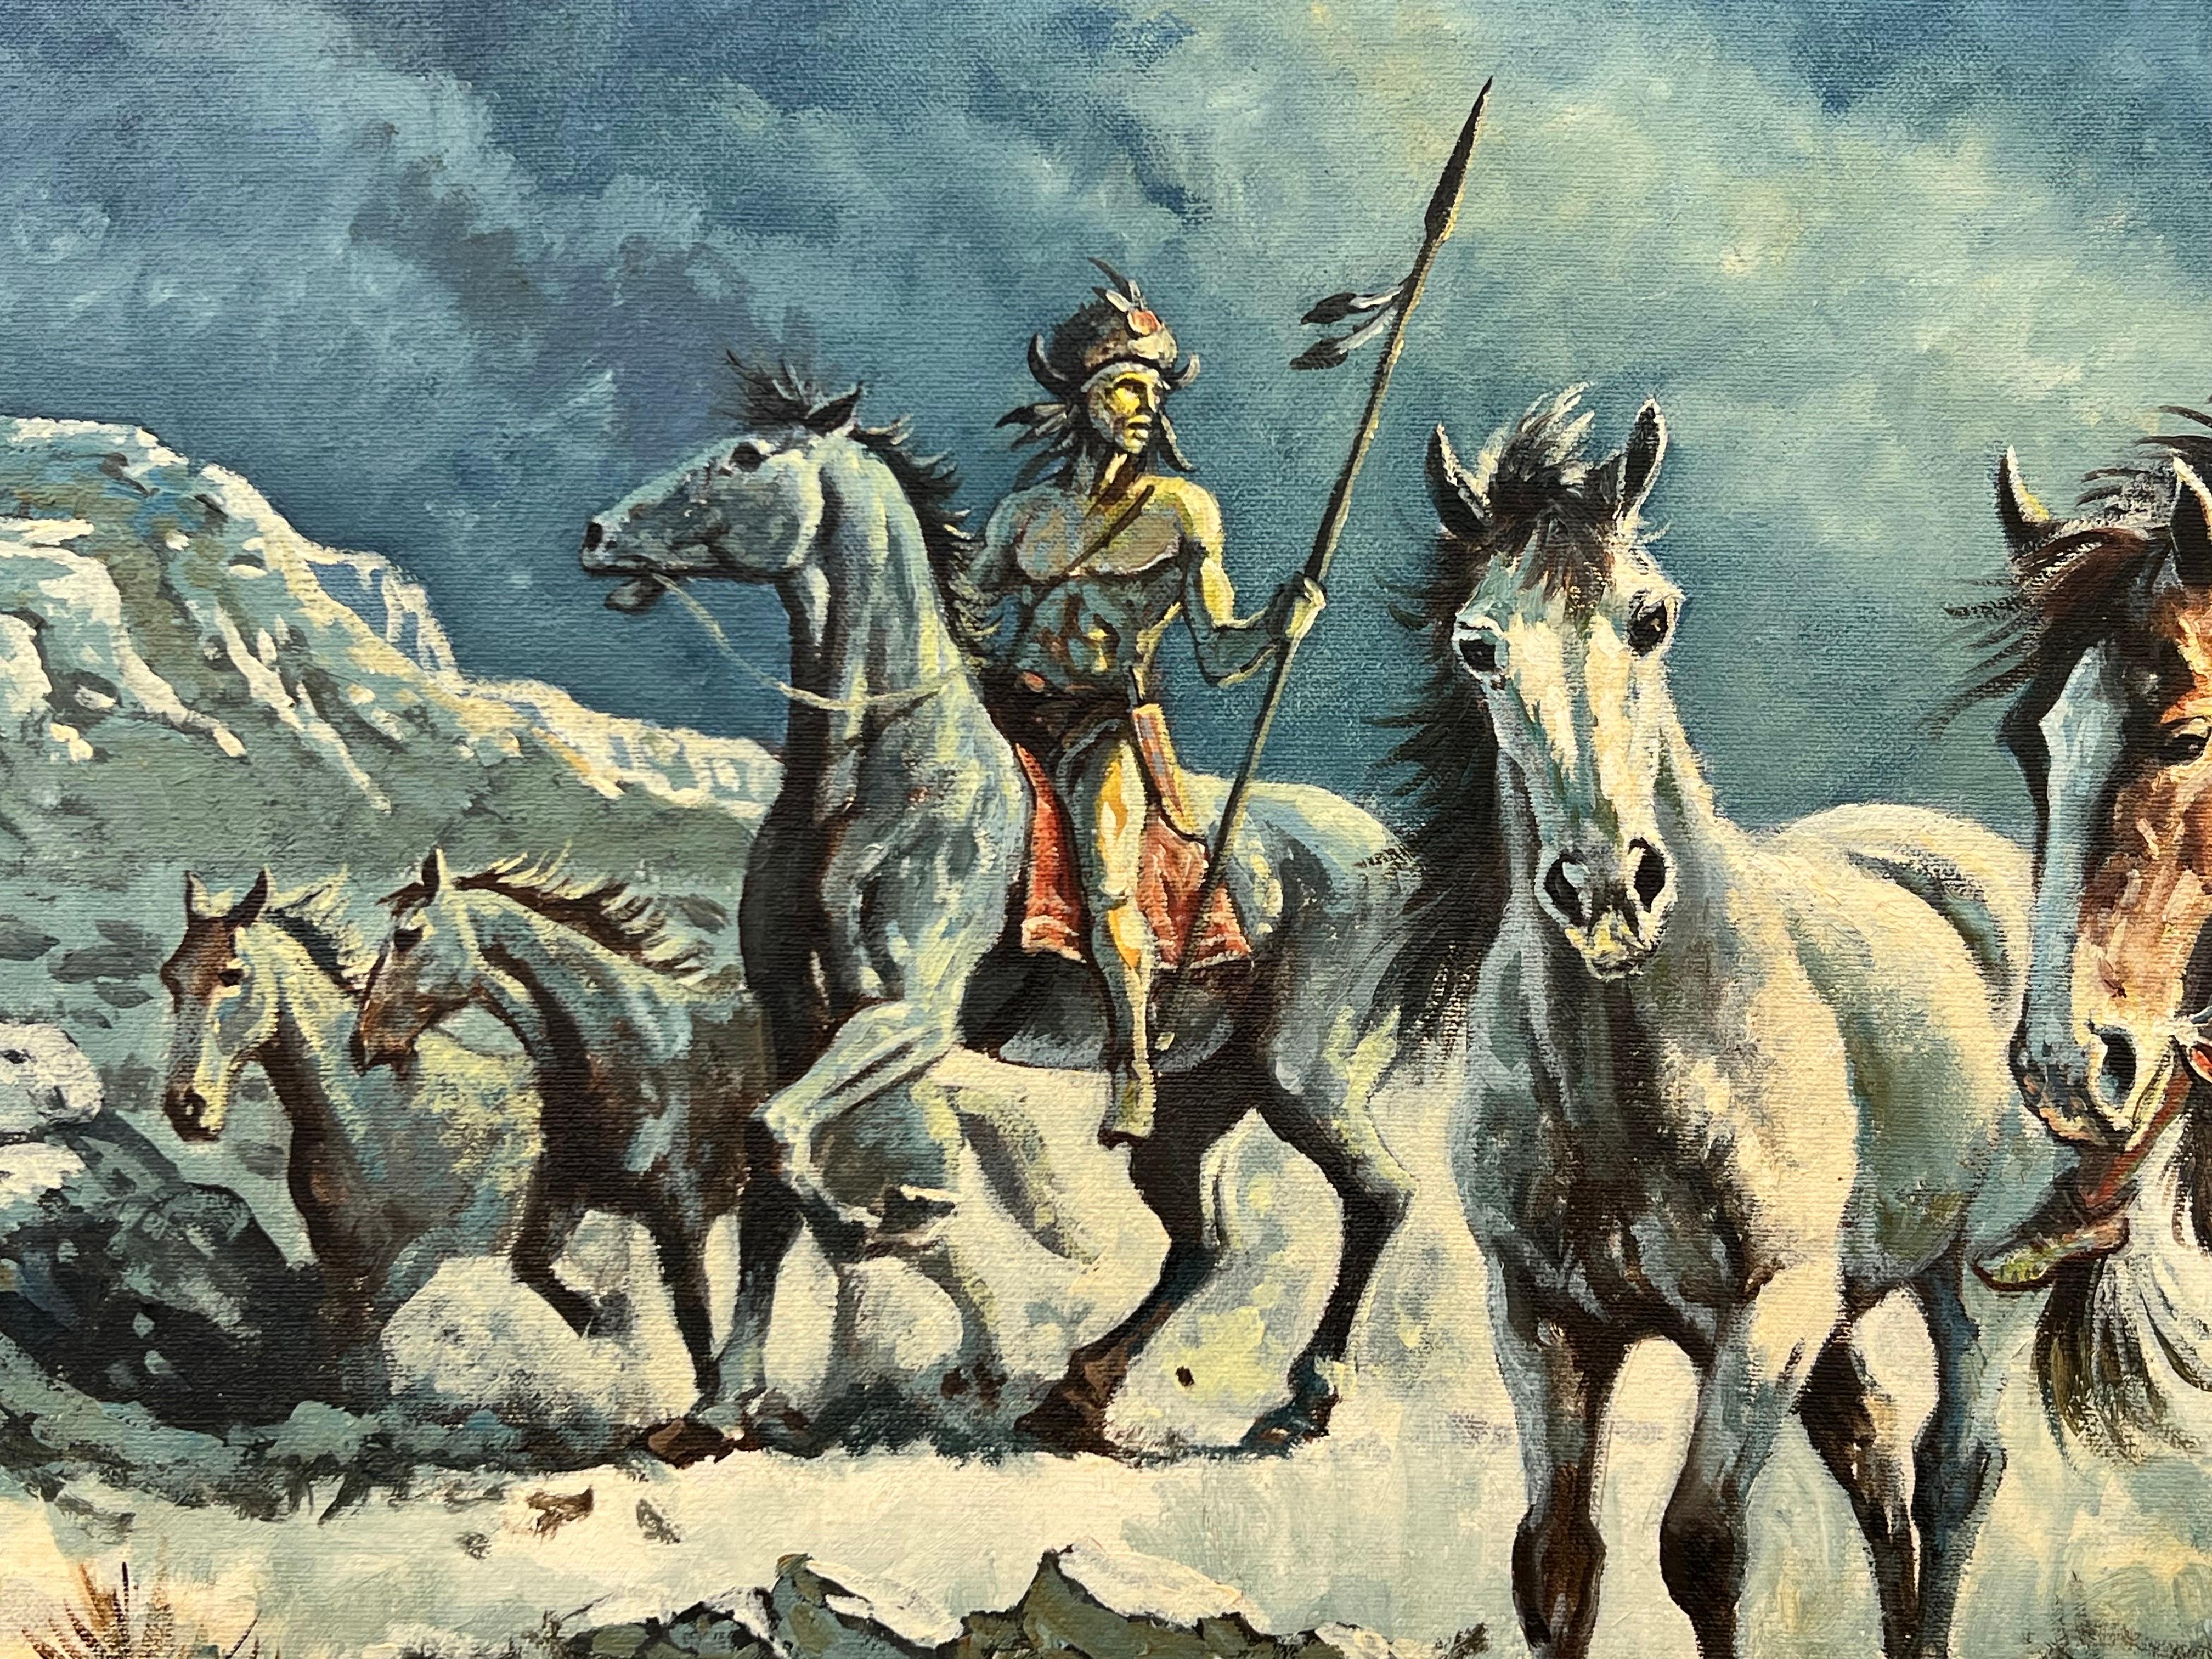 Native American Indian Warriors on Horseback with Dramatic Moonlit Landscape - Painting by Alan Langford